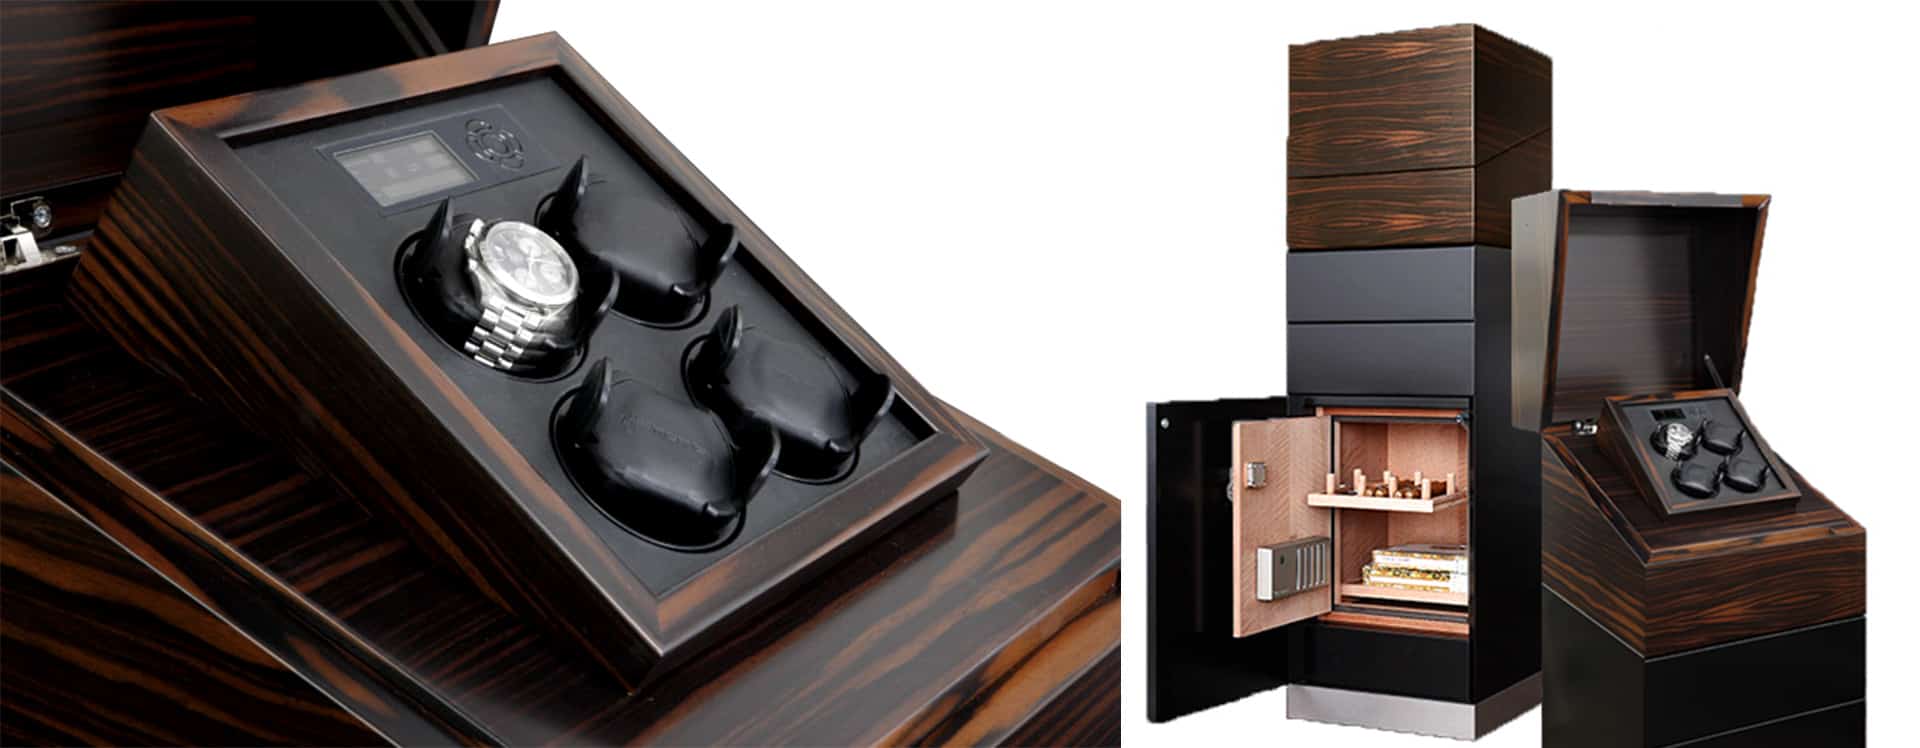 watchwinder for your humidor » Gerber Humidor